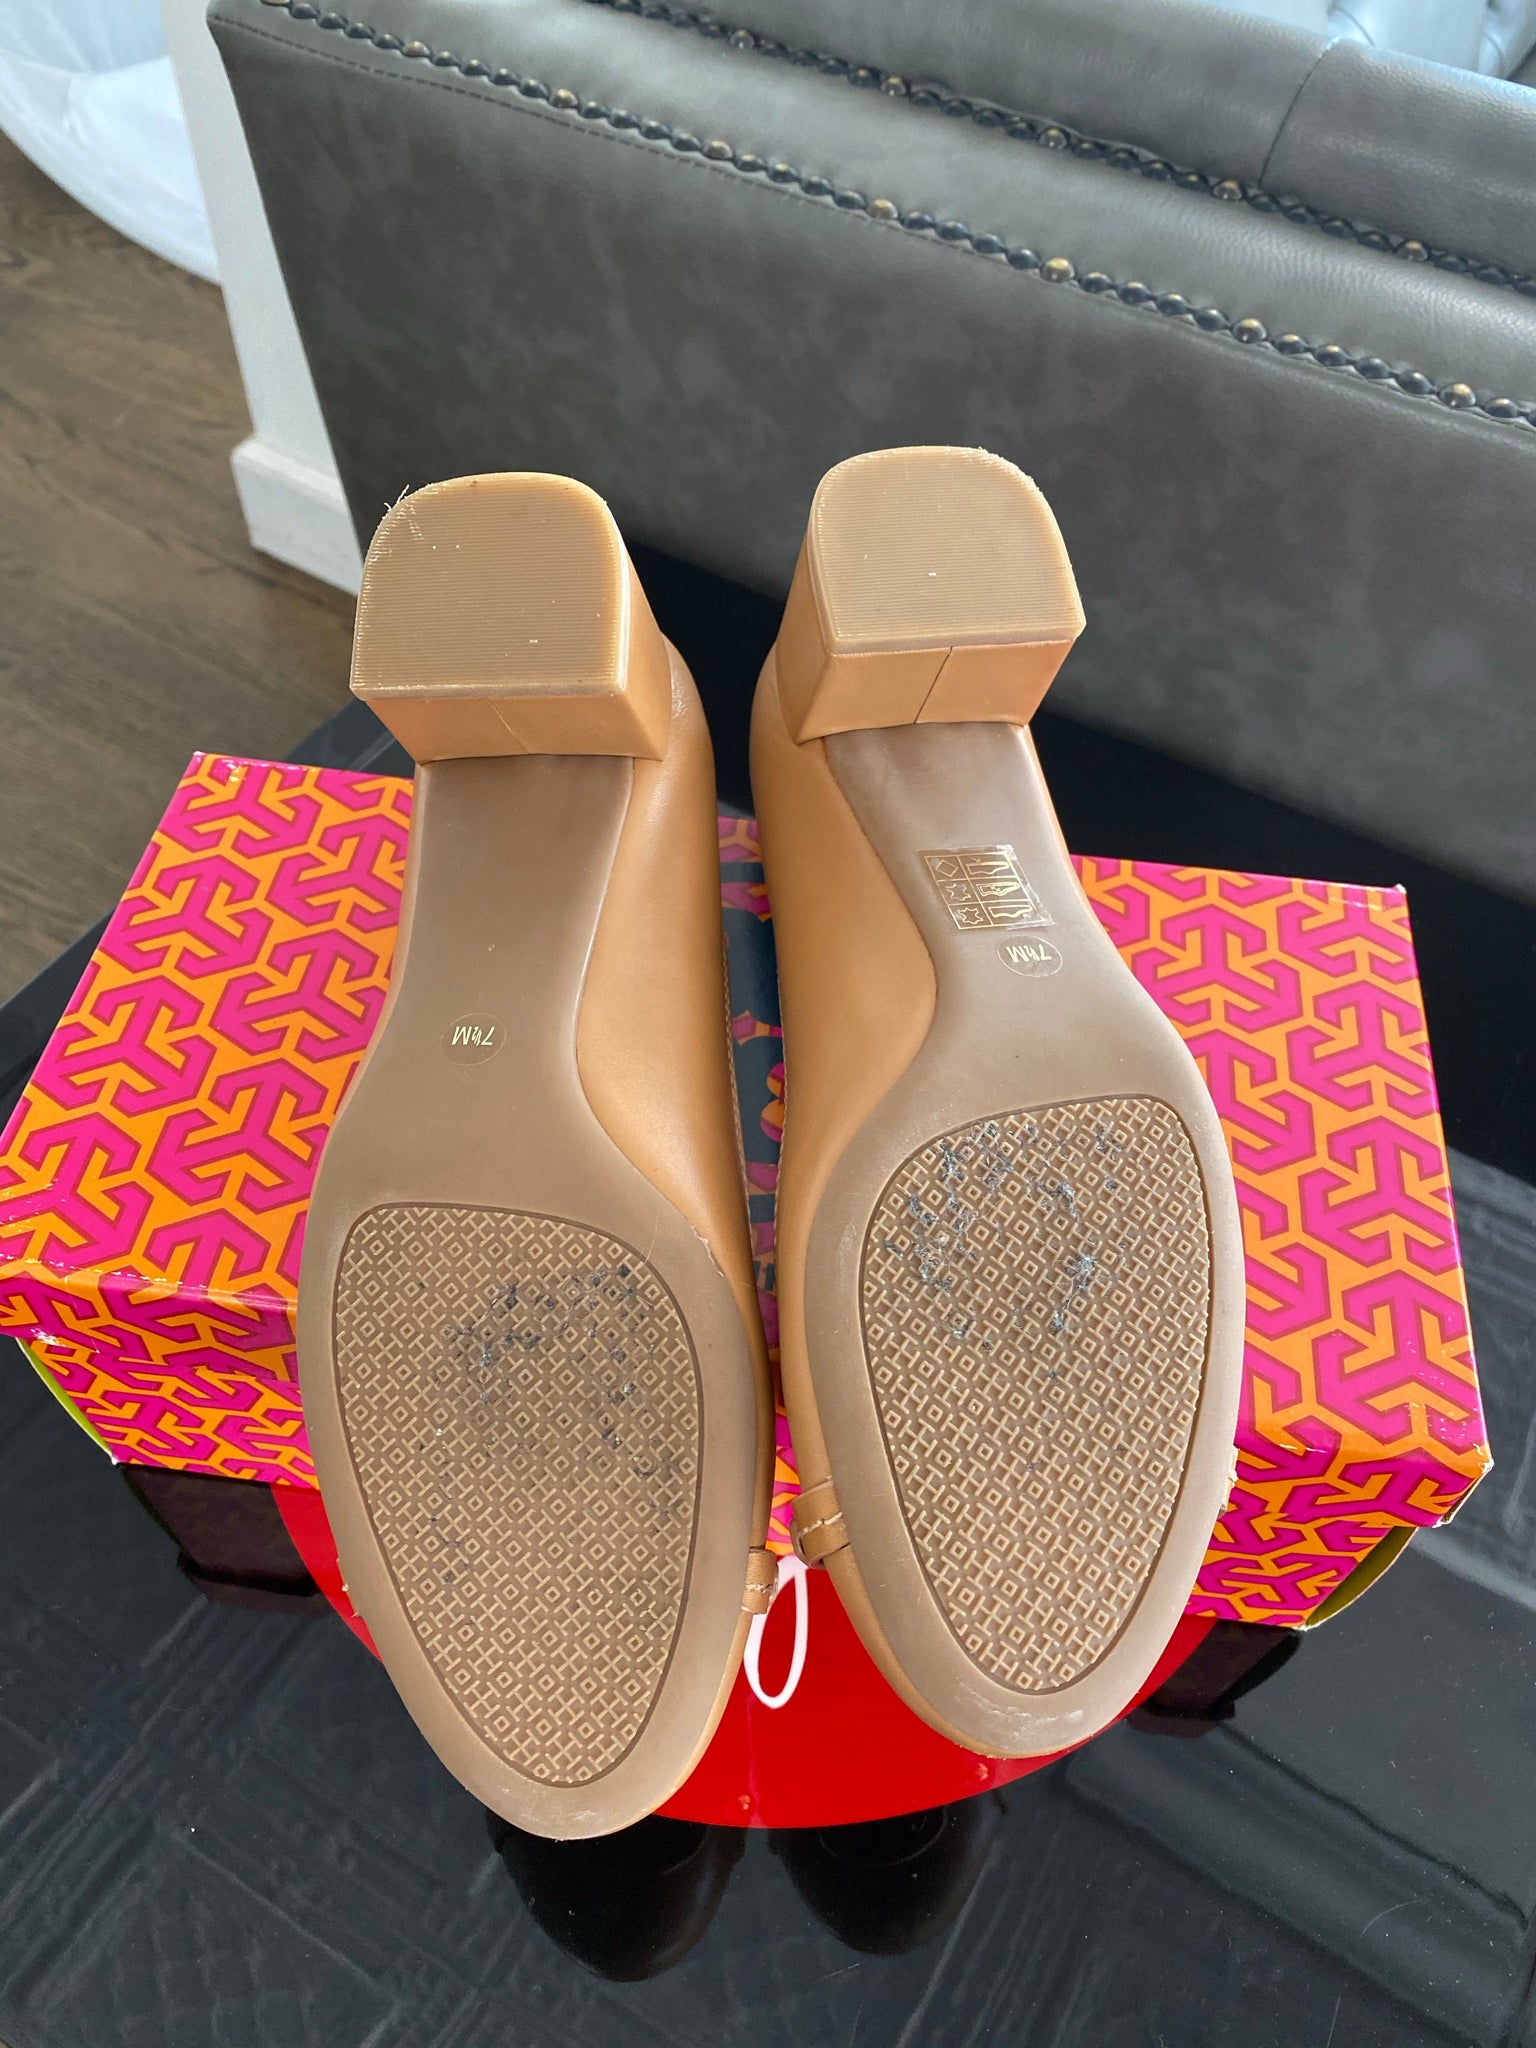 Tory Burch Heels – Midtown Authentic Wyckoff